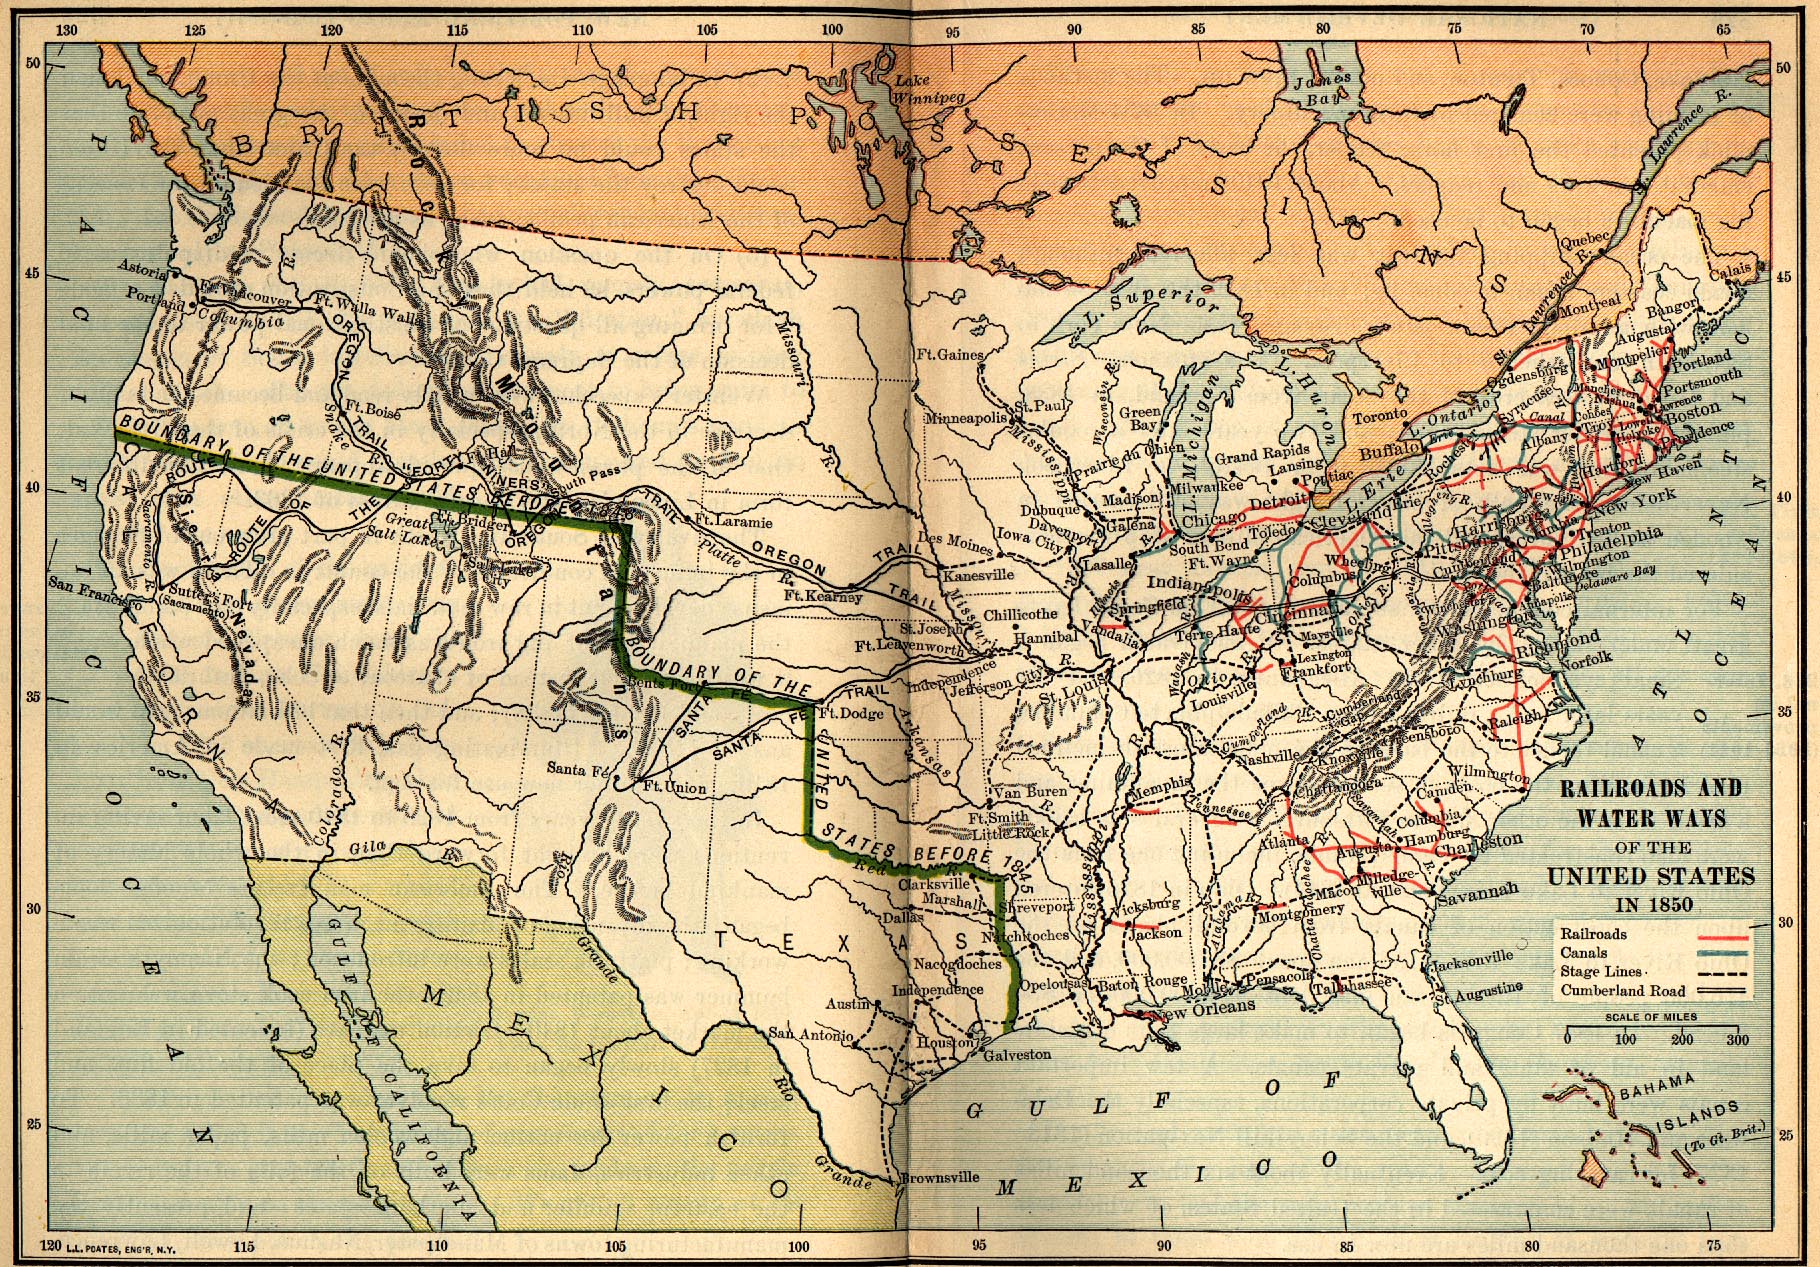 Image of Railroad Map